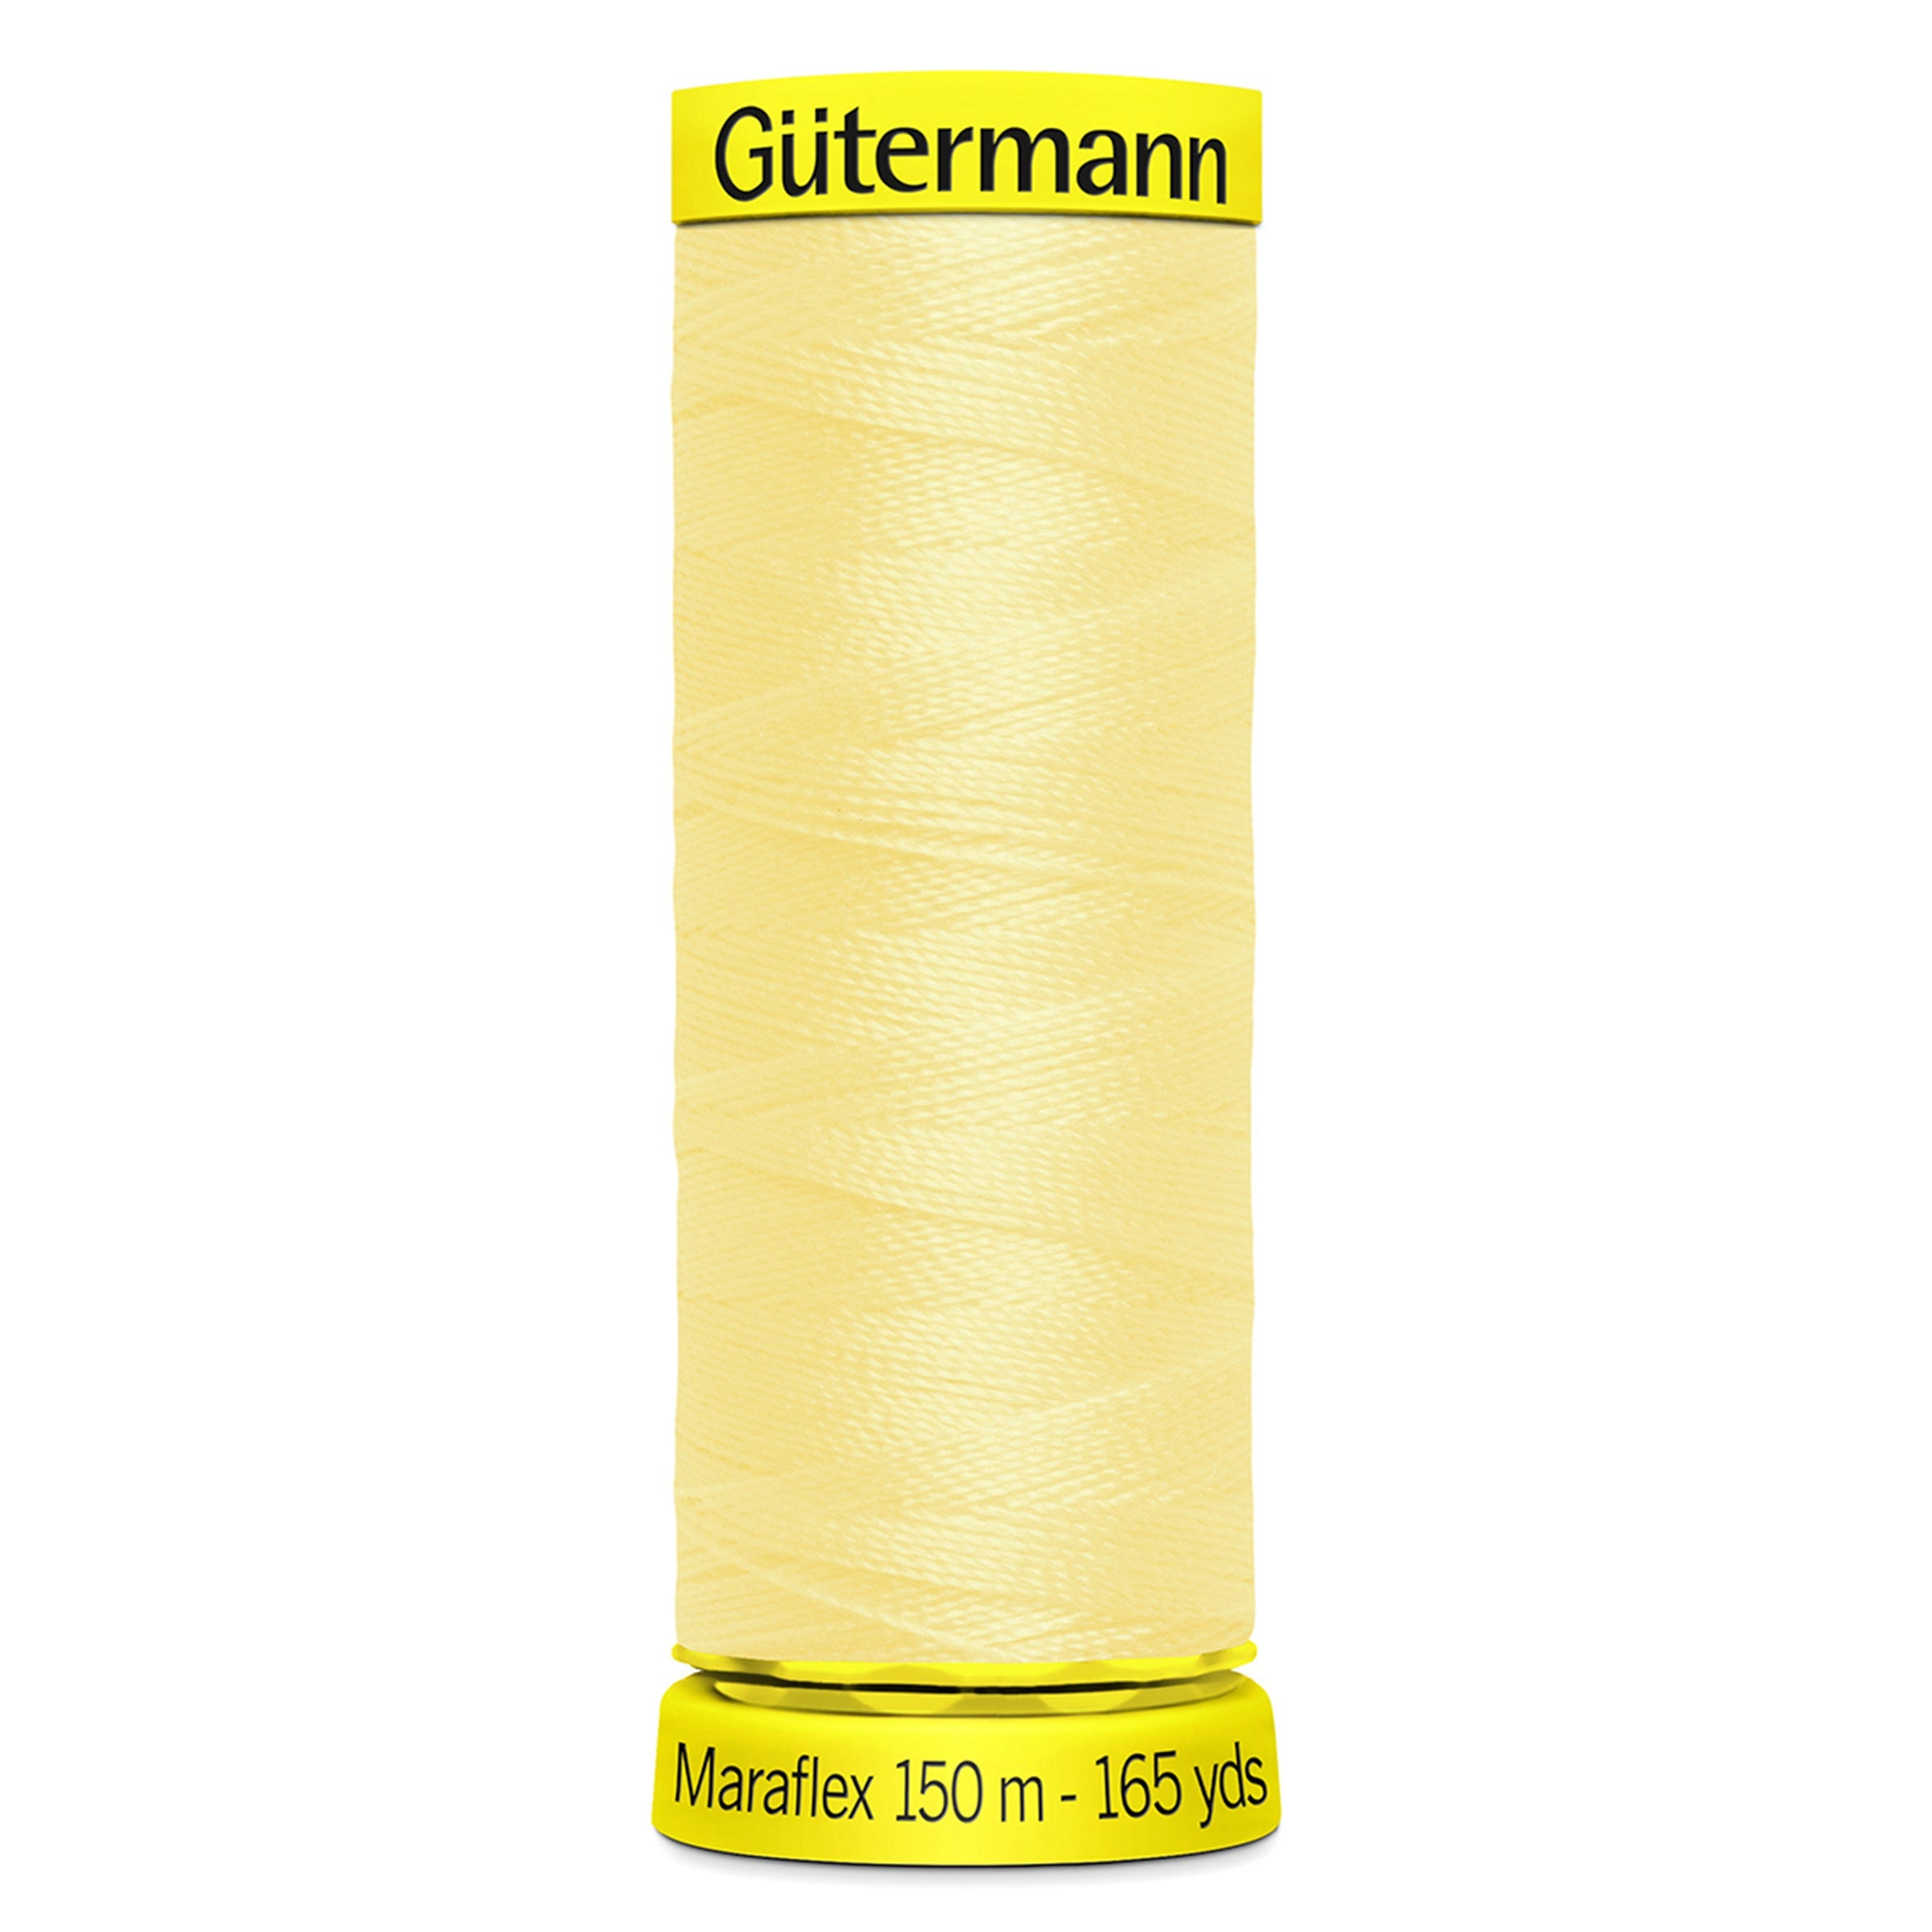 Gutermann Maraflex Stretchy Sewing Thread 150m colour 325 Primrose from Jaycotts Sewing Supplies